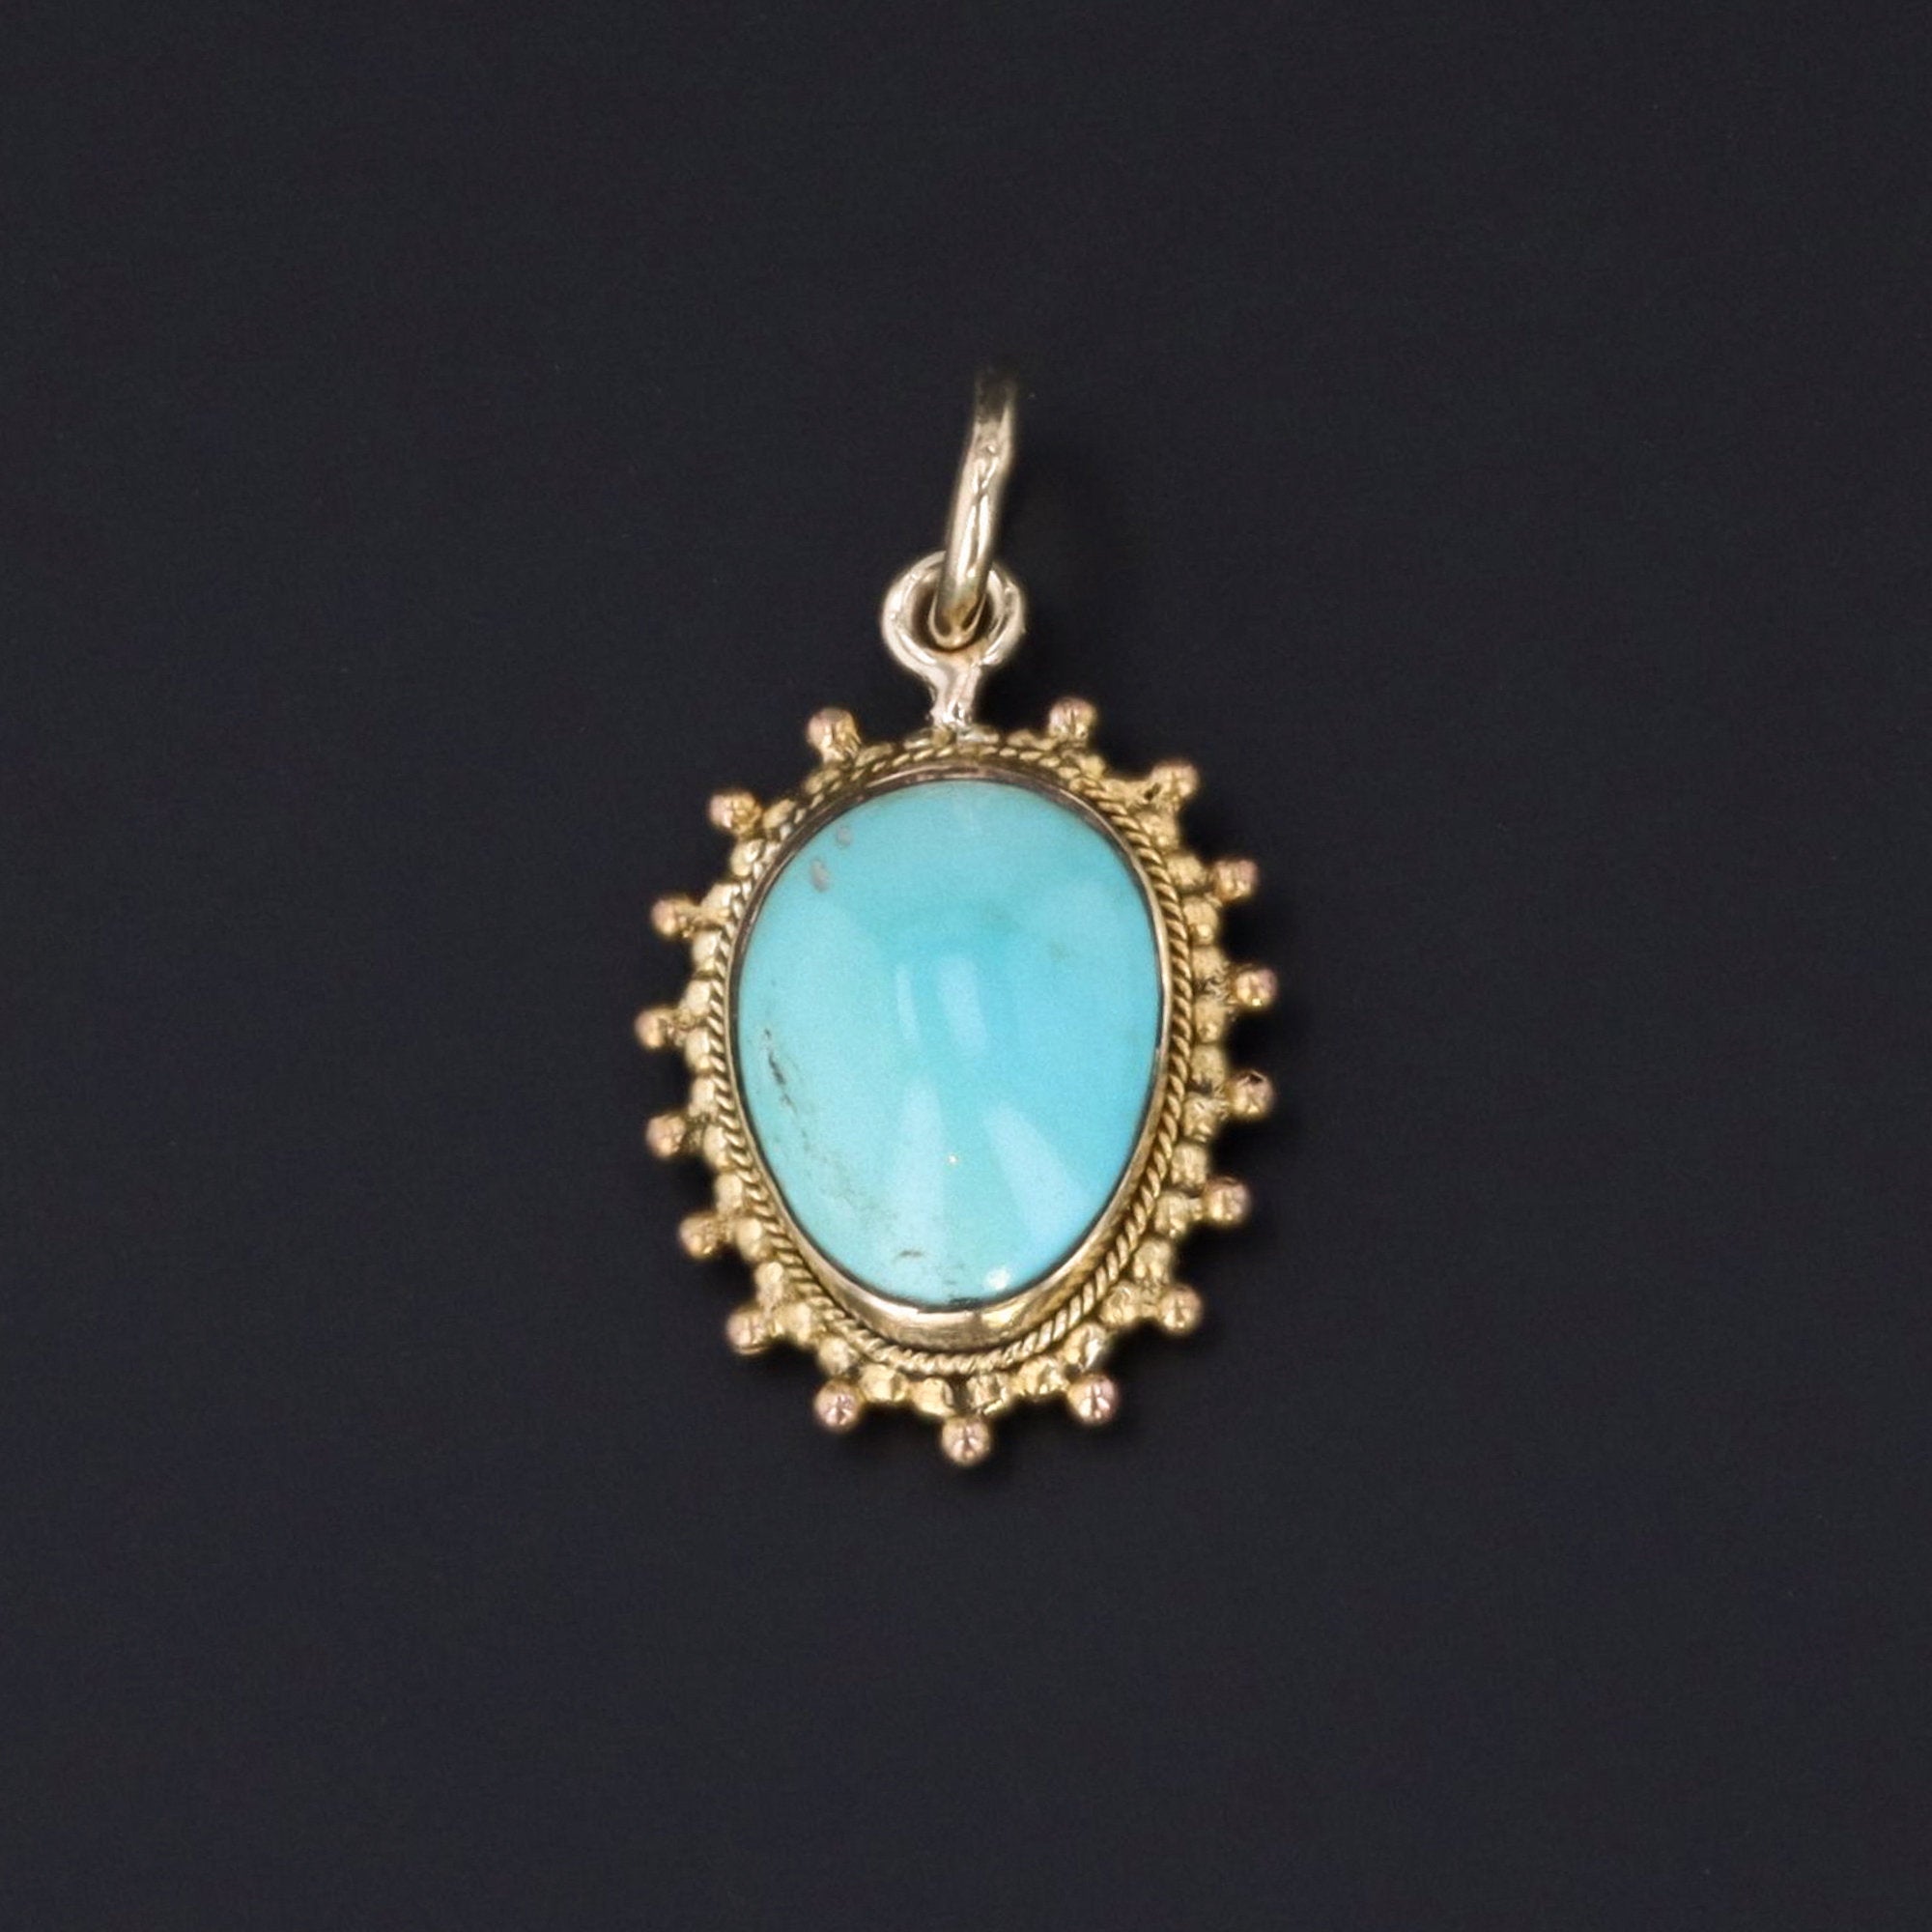 Antique Turquoise Charm | Antique Pin Conversion | 9ct Gold Pendant | Something Blue | Gold Charm